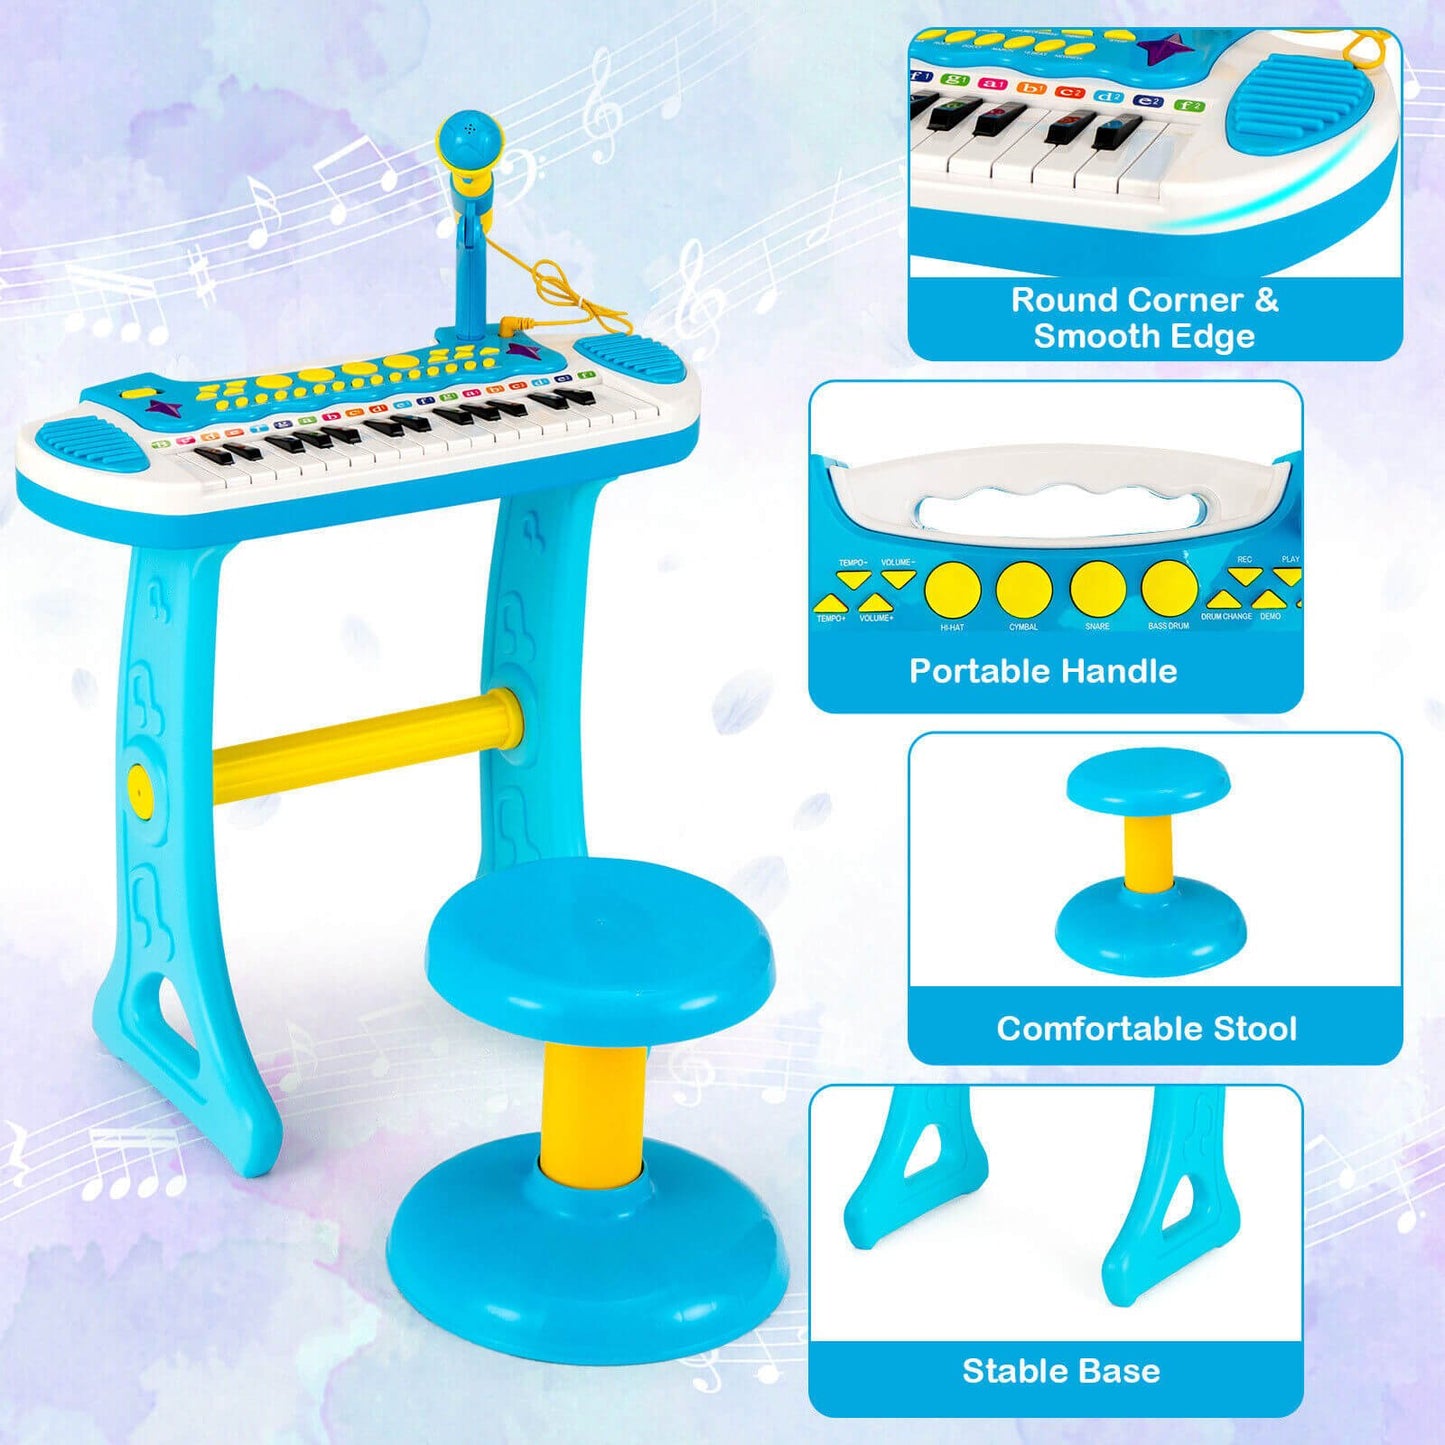 31-Key Kids Piano Keyboard Toy with Microphone and Multiple Sounds for Age 3+, Blue